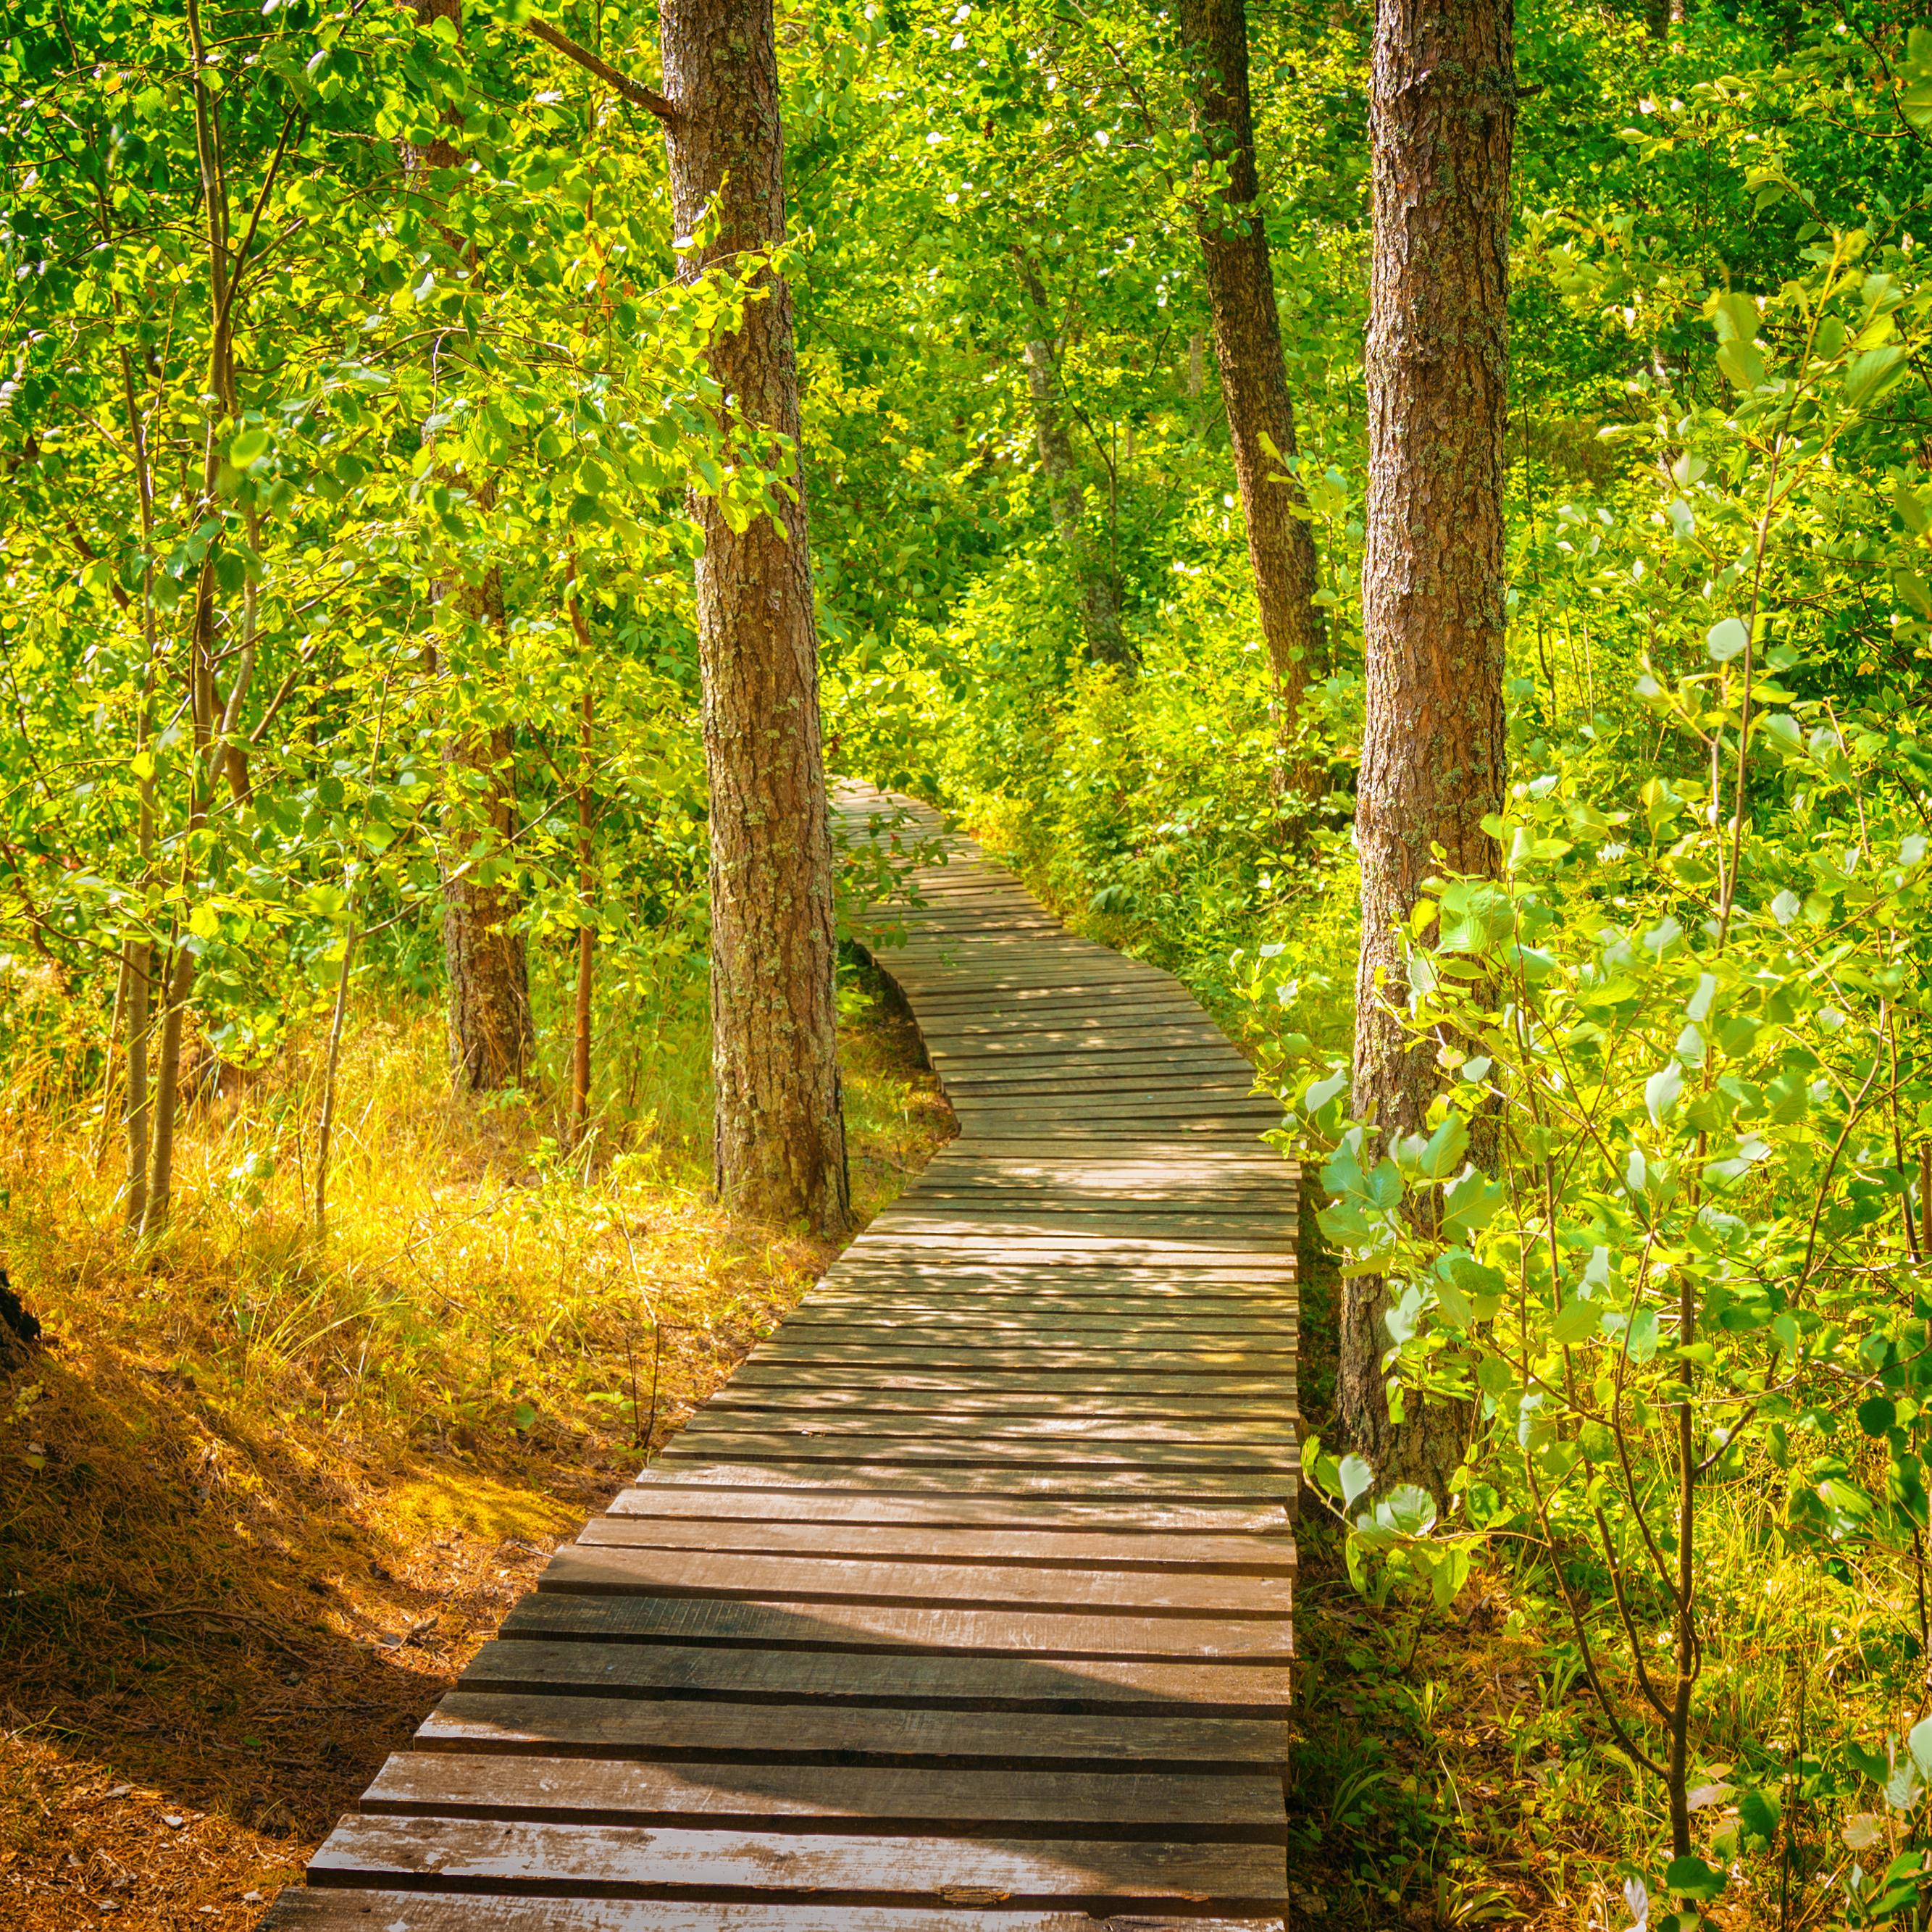 Wooden pathway winding between trees with green leaves